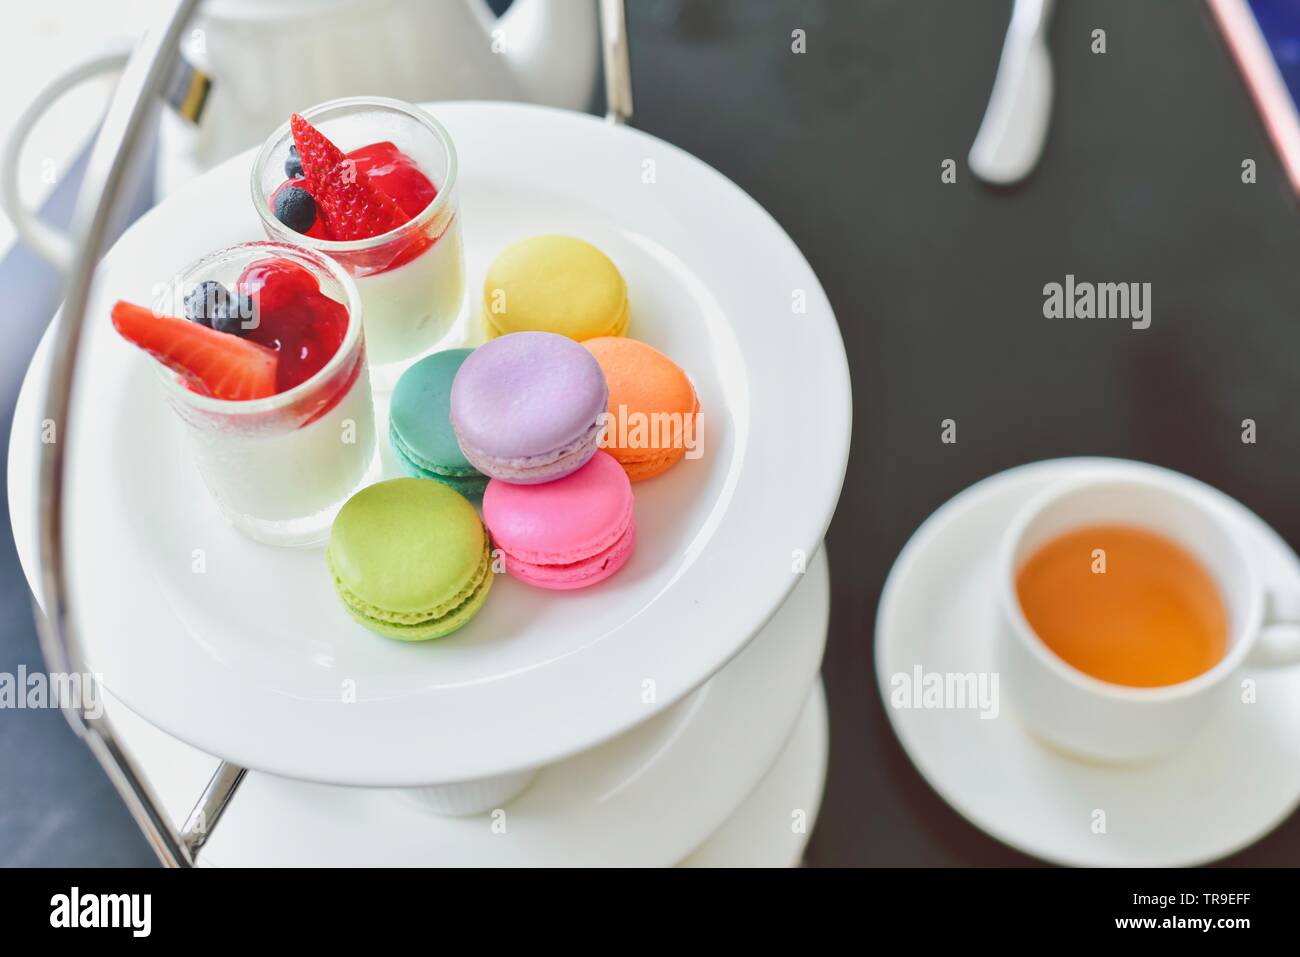 Traditional English Afternoon Tea Set with Colourful Macarons and Desserts Stock Photo